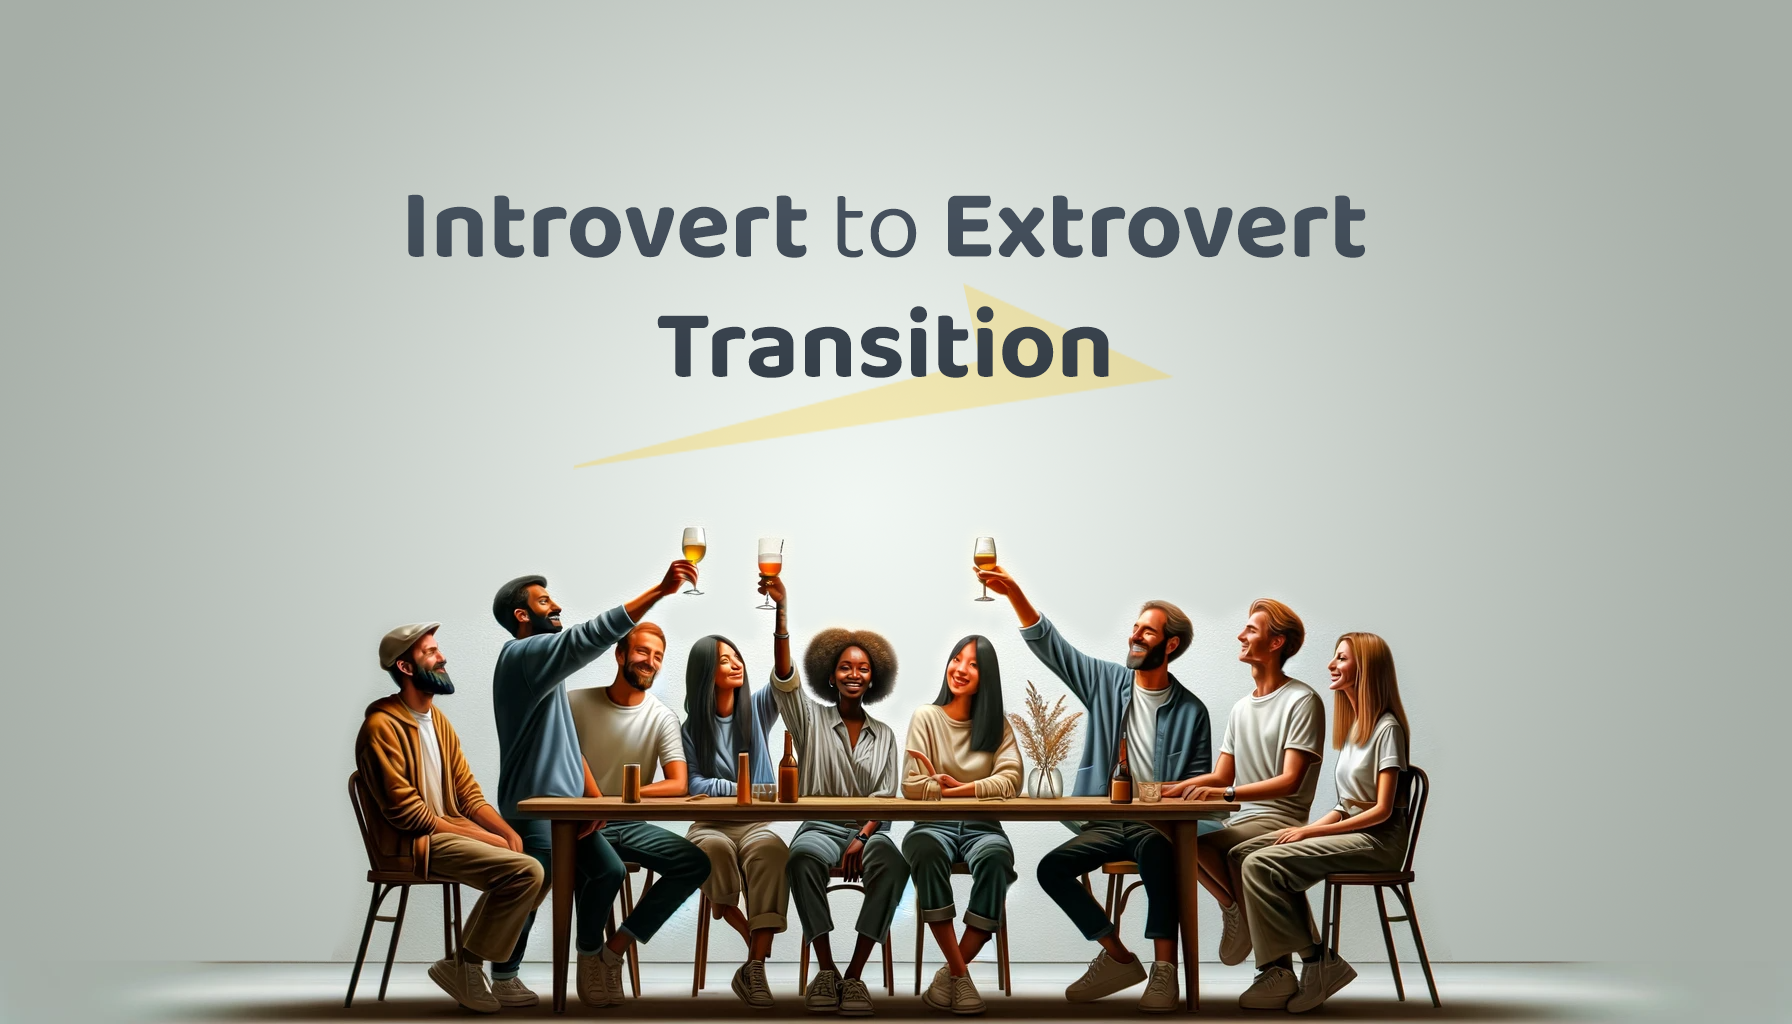 Introvert to Extrovert Transition